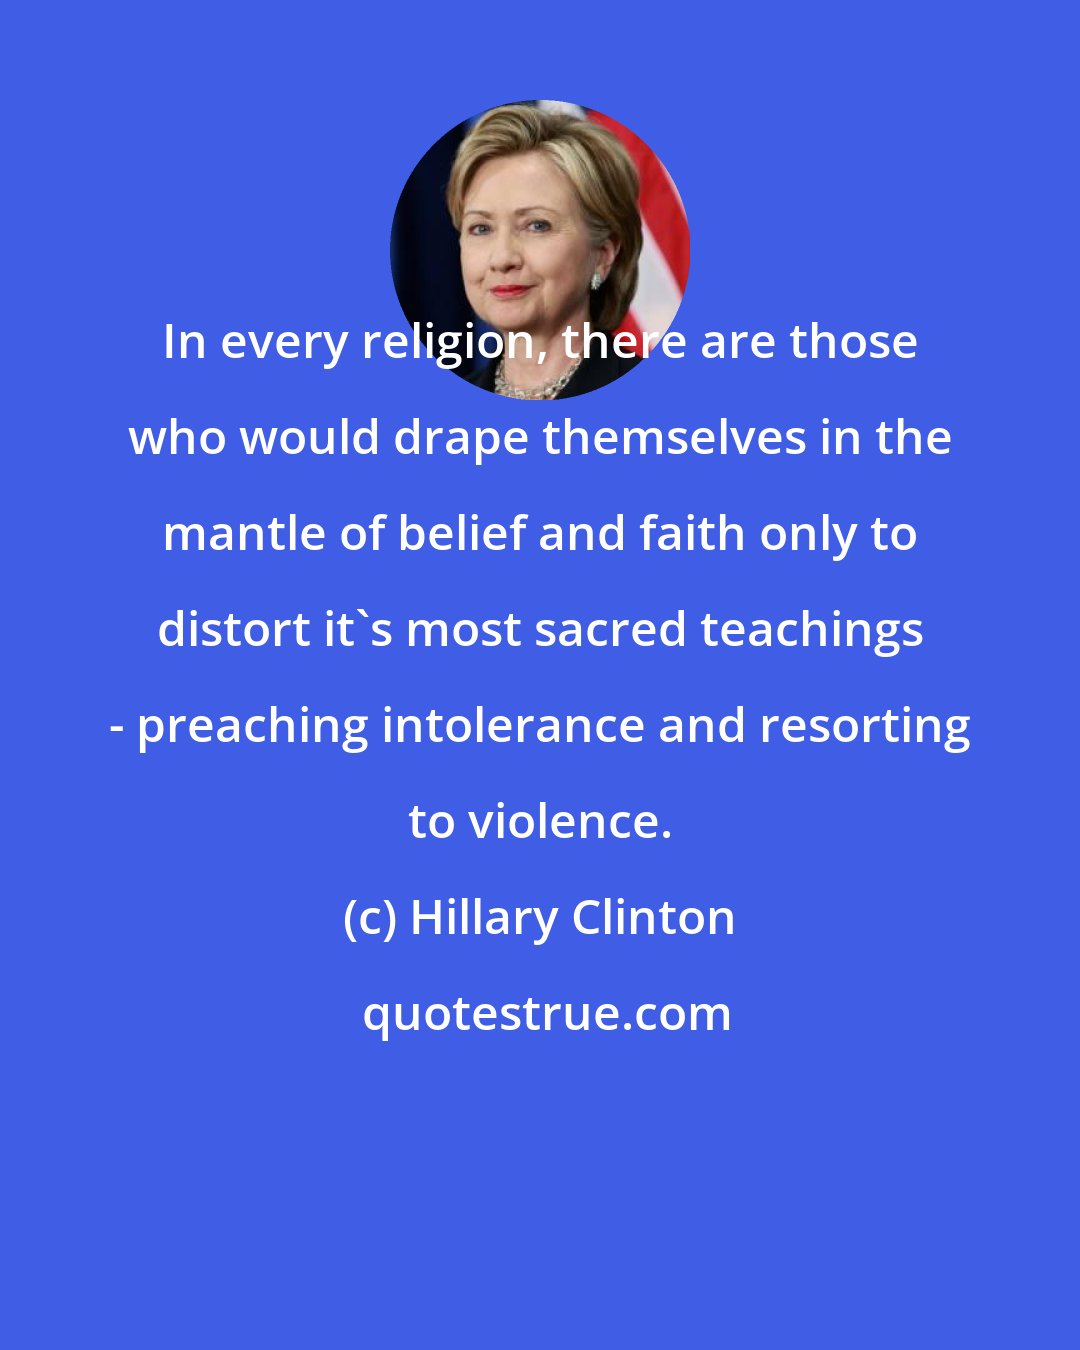 Hillary Clinton: In every religion, there are those who would drape themselves in the mantle of belief and faith only to distort it's most sacred teachings - preaching intolerance and resorting to violence.